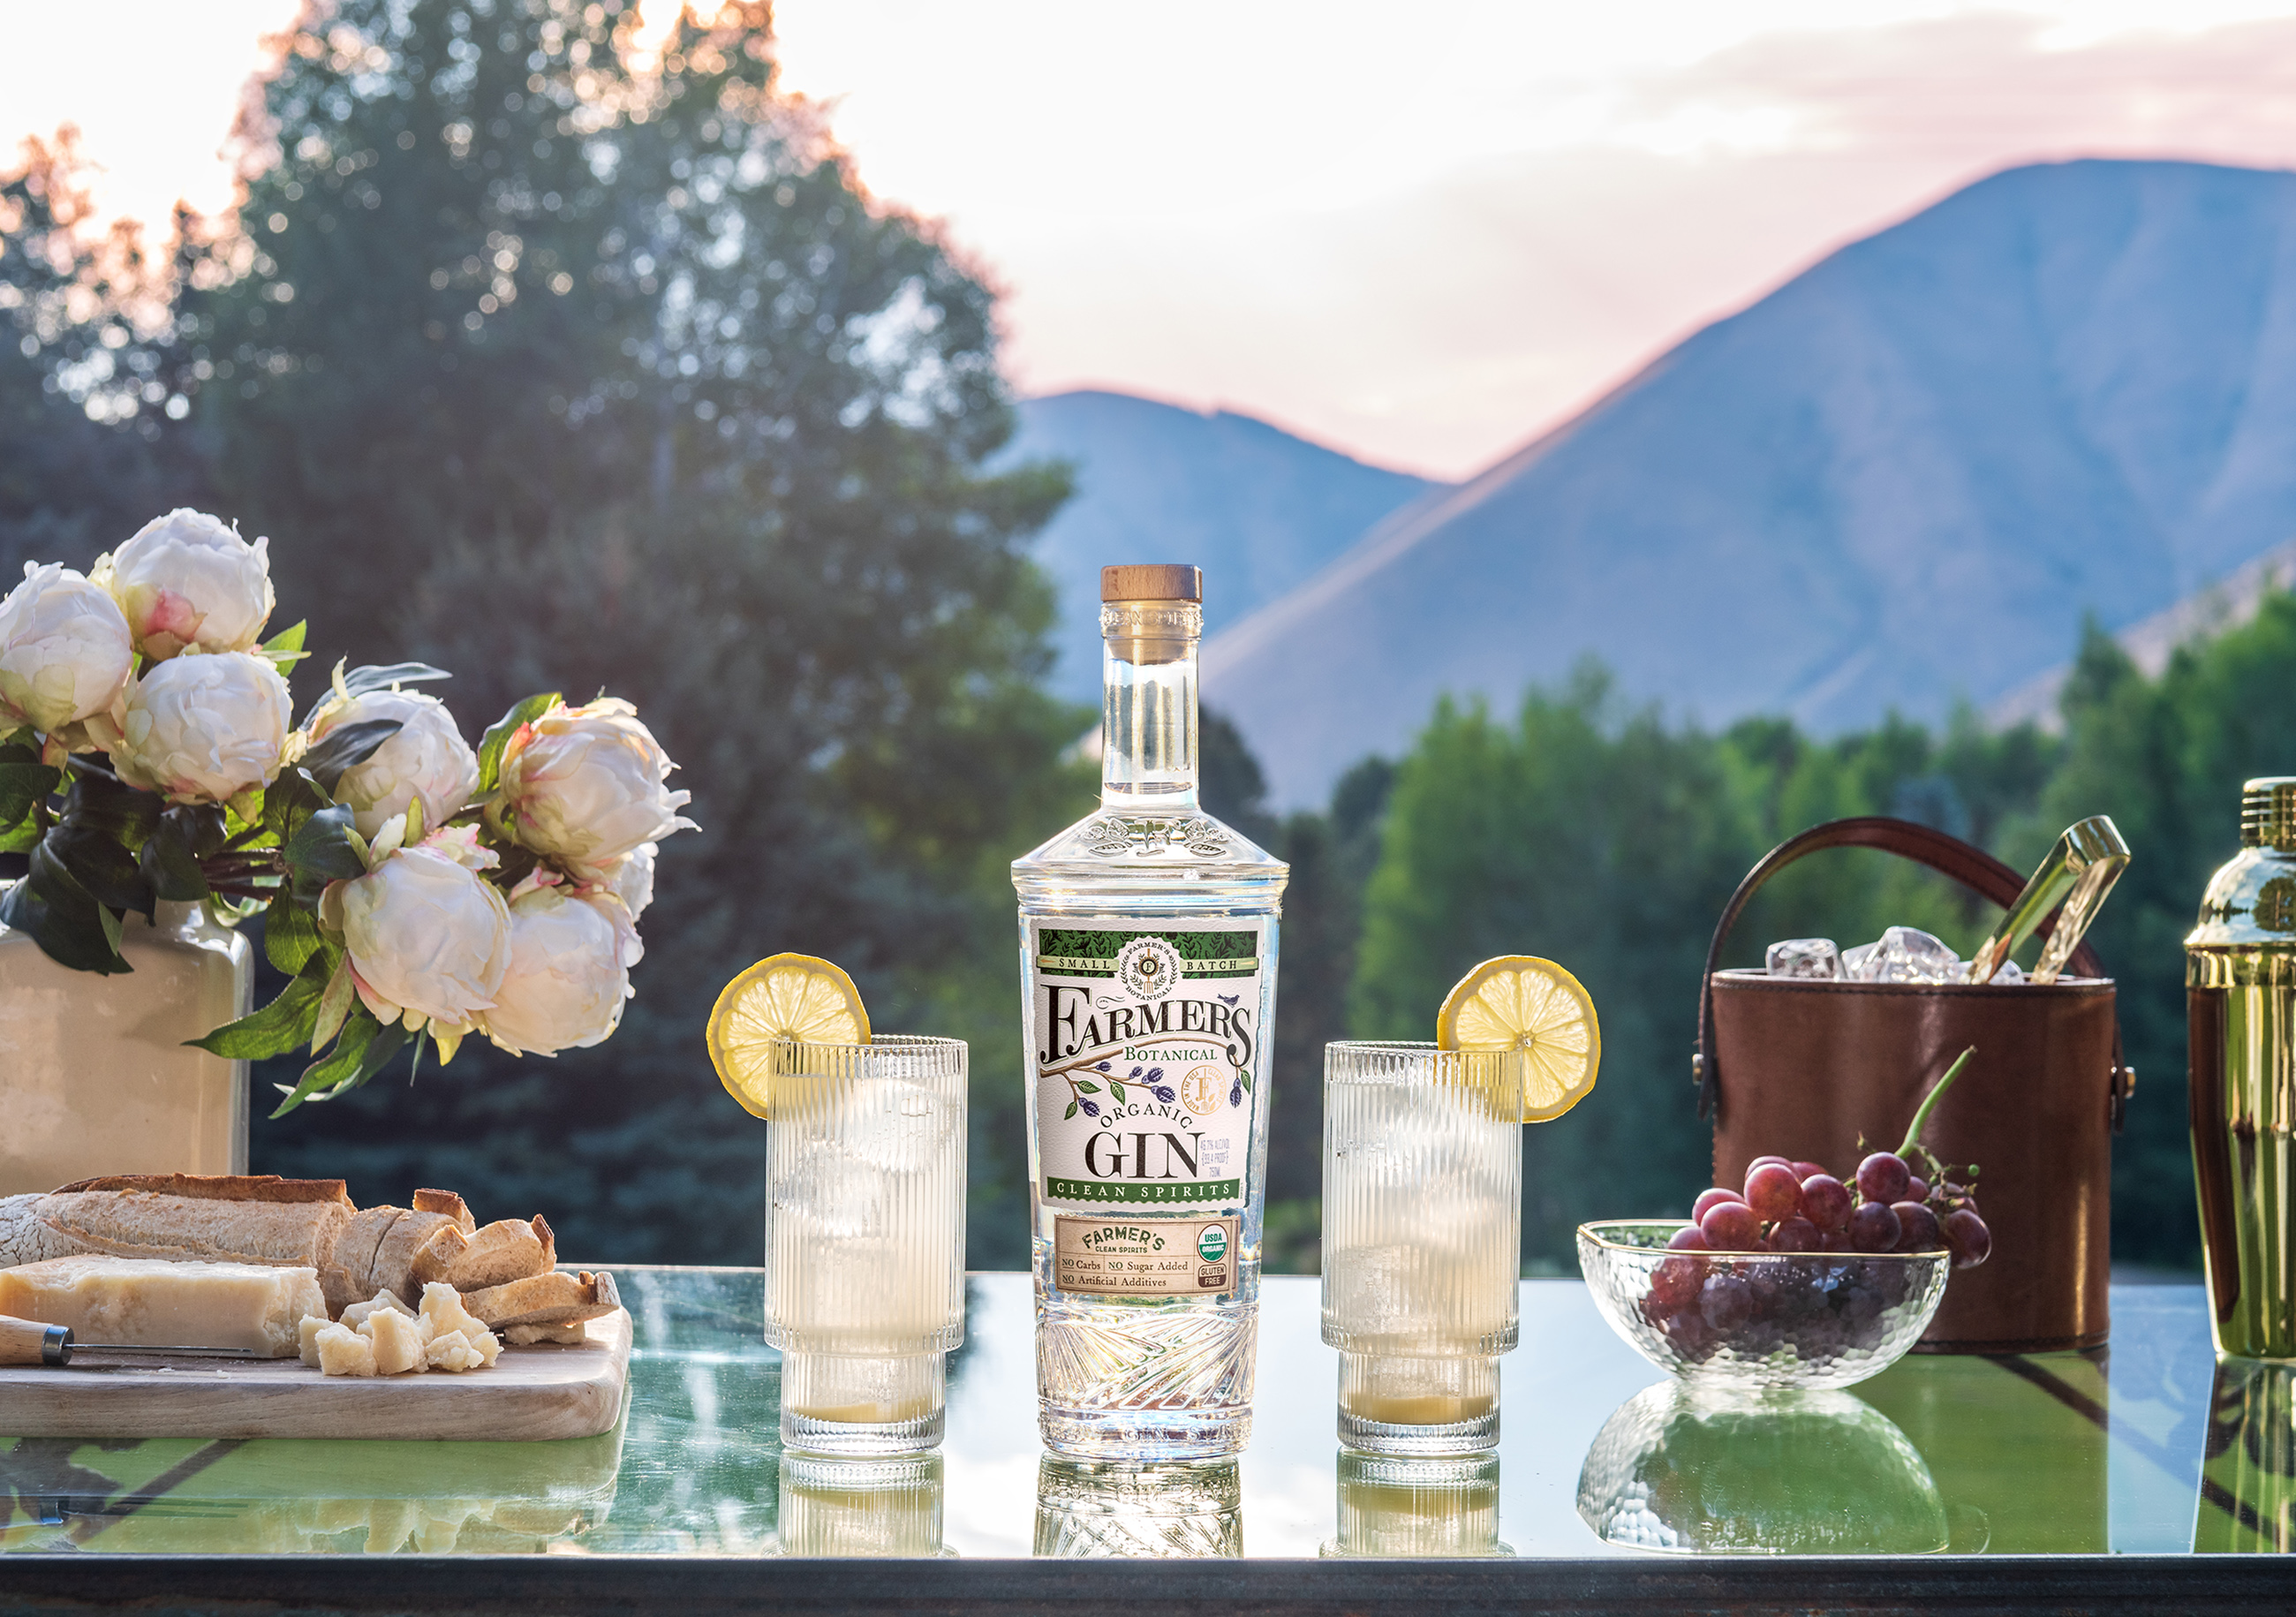 Farmer's Organic Gin is the perfect complement to your aperitivo spread.